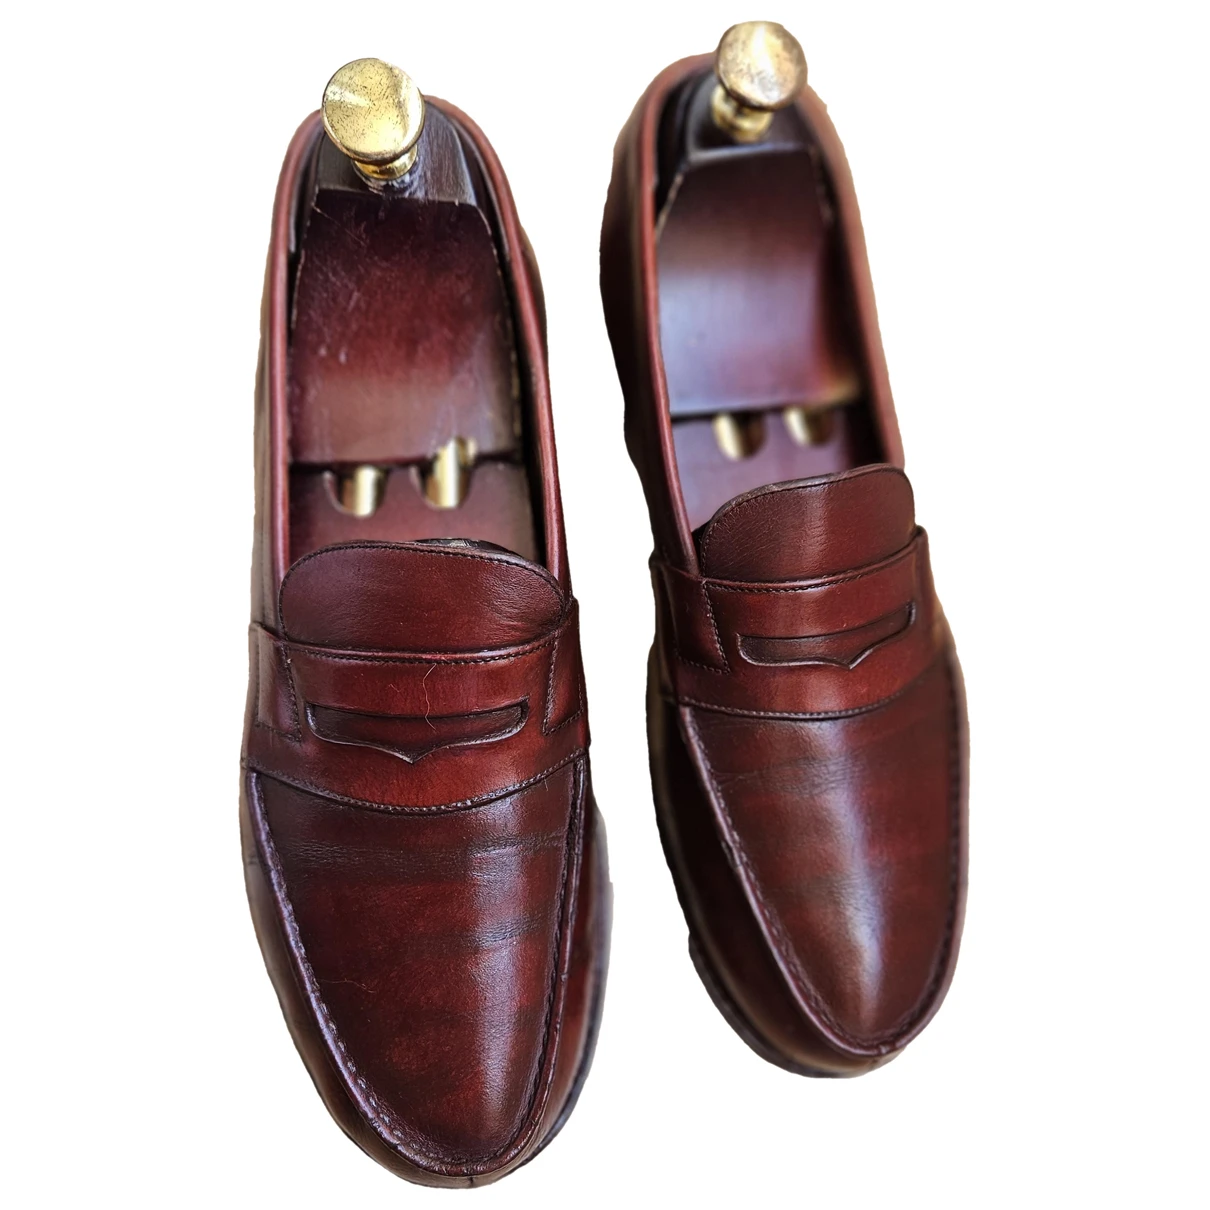 Pre-owned Jm Weston Leather Flats In Burgundy